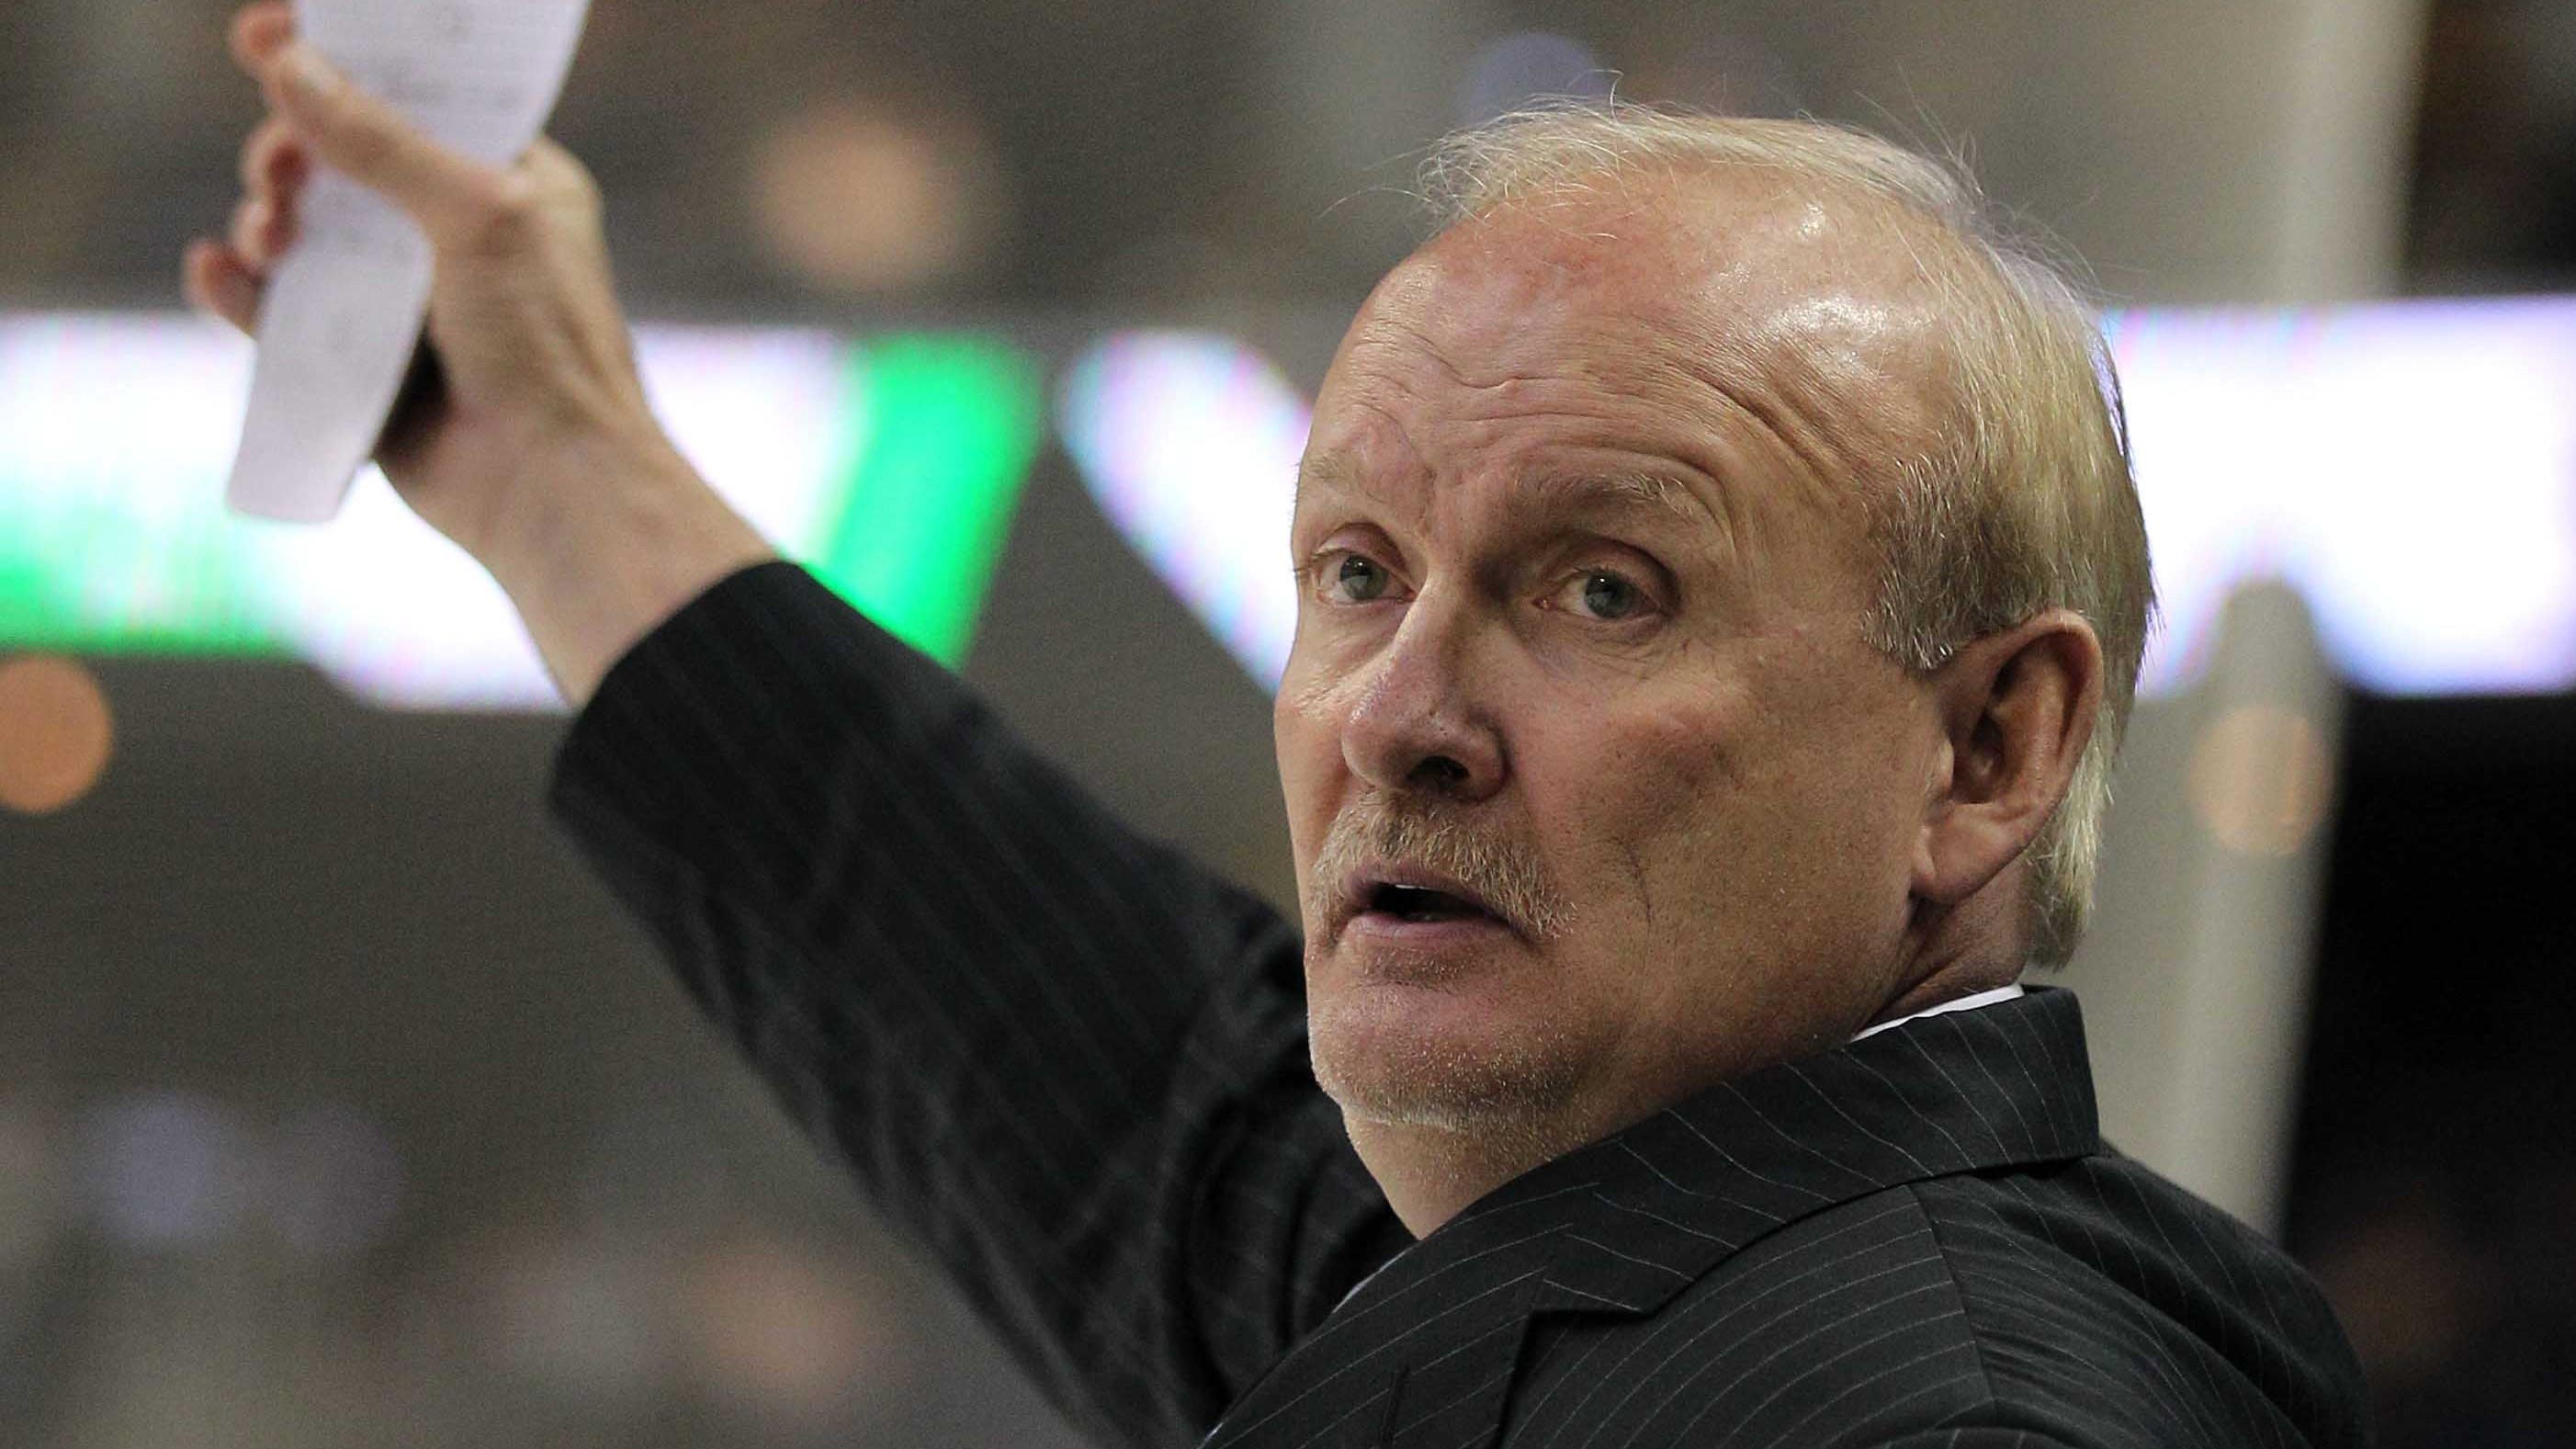 Nov 16, 2011; Buffalo, NY, USA; Buffalo Sabres head coach Lindy Ruff during a game against the New Jersey Devils at the First Niagara Center. Mandatory Credit: Timothy T. Ludwig-USA TODAY Sports / © Timothy T. Ludwig-USA TODAY Sports